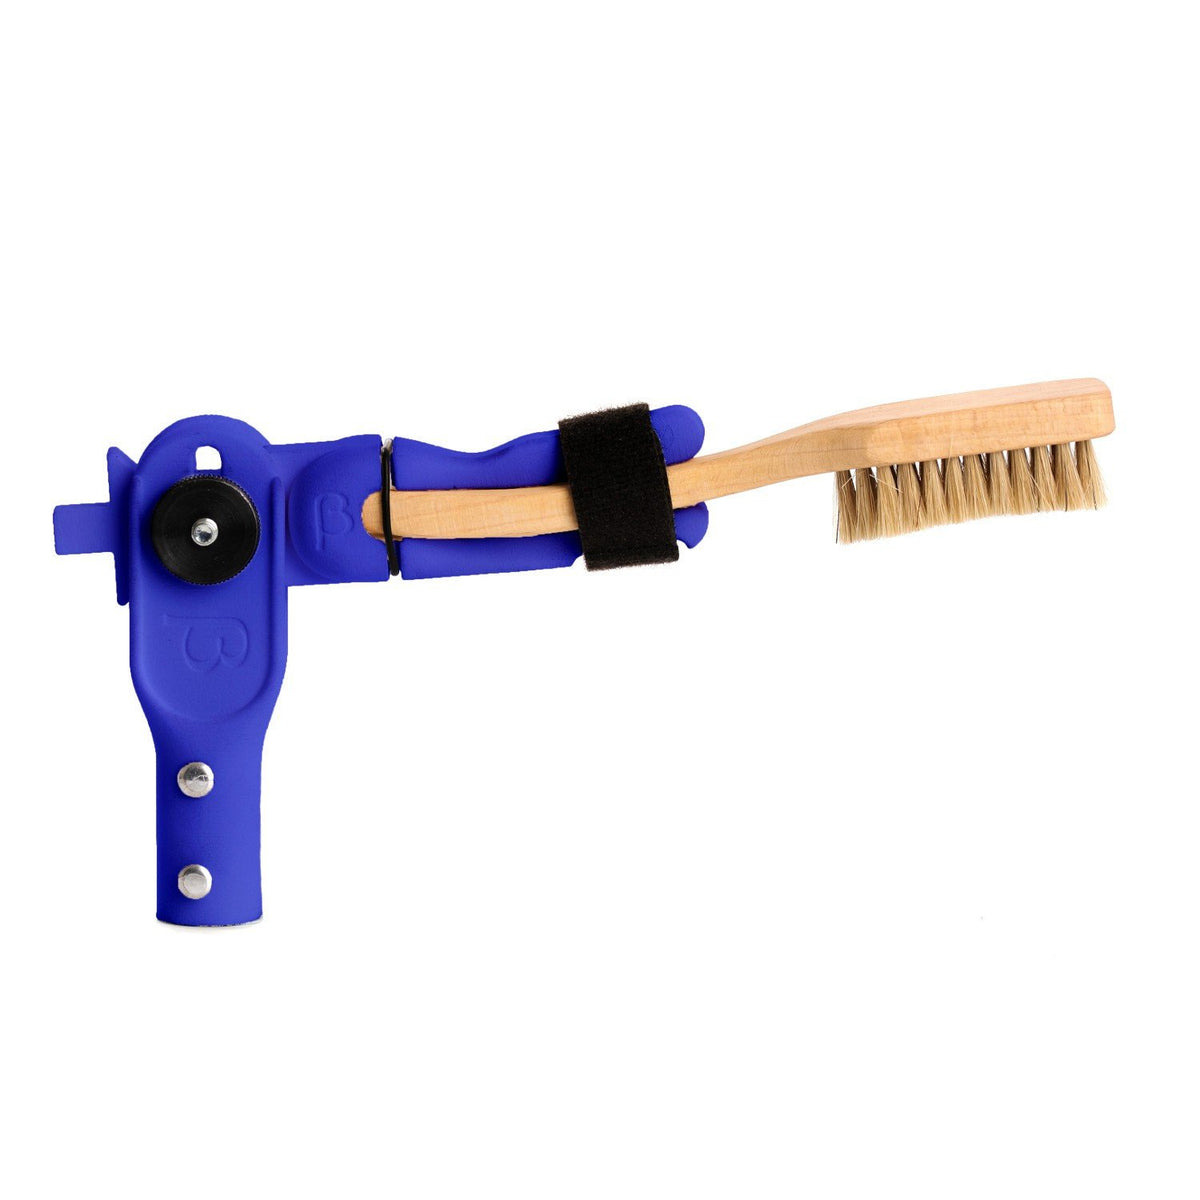 Beta Project bouldering Brush Stick, head shown at 90 degree angle with brush